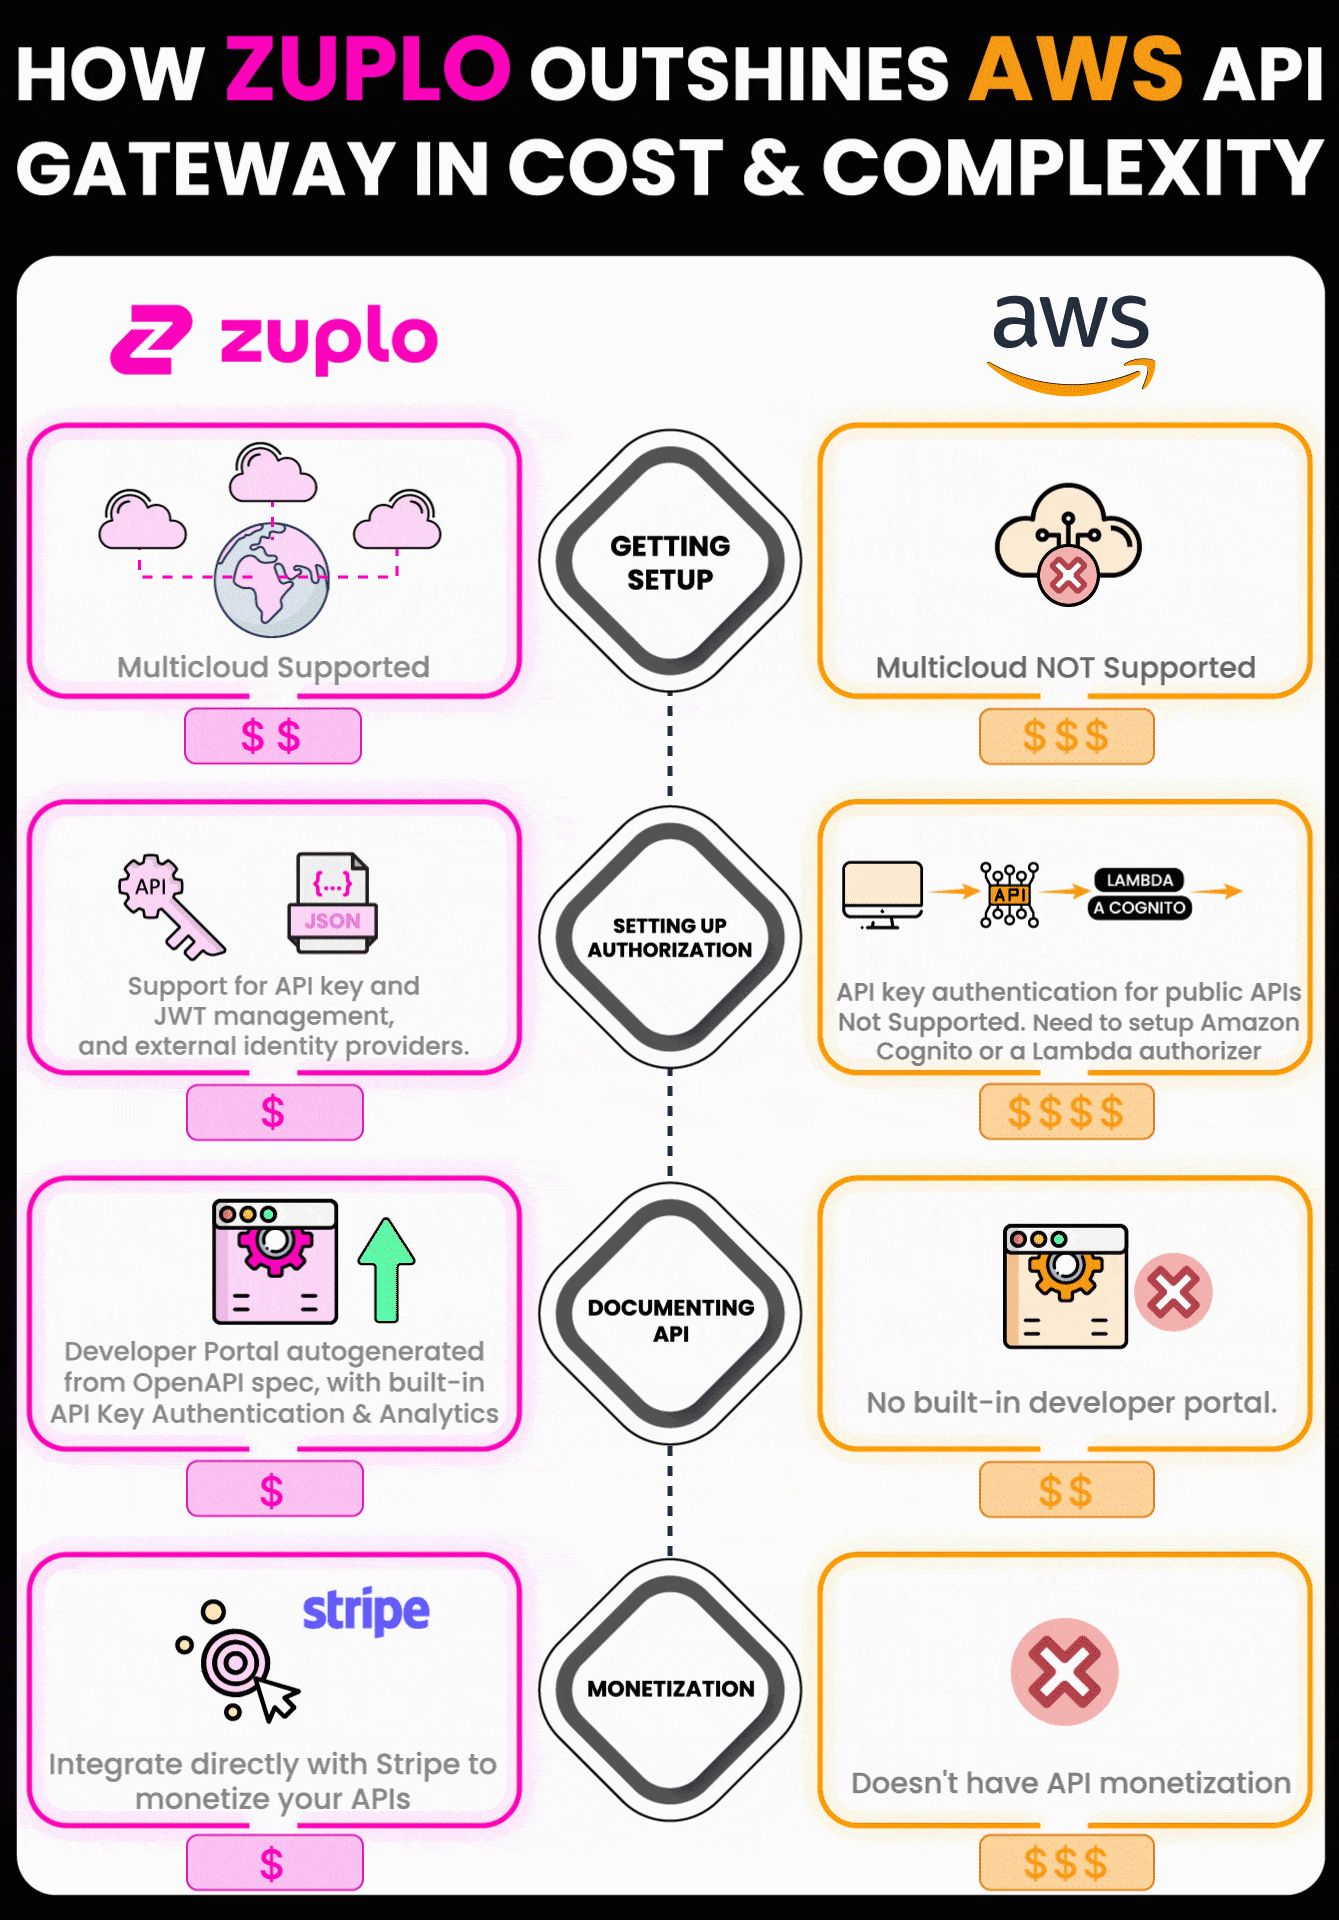 How Zuplo outshines AWS API Gateway in cost and complexity